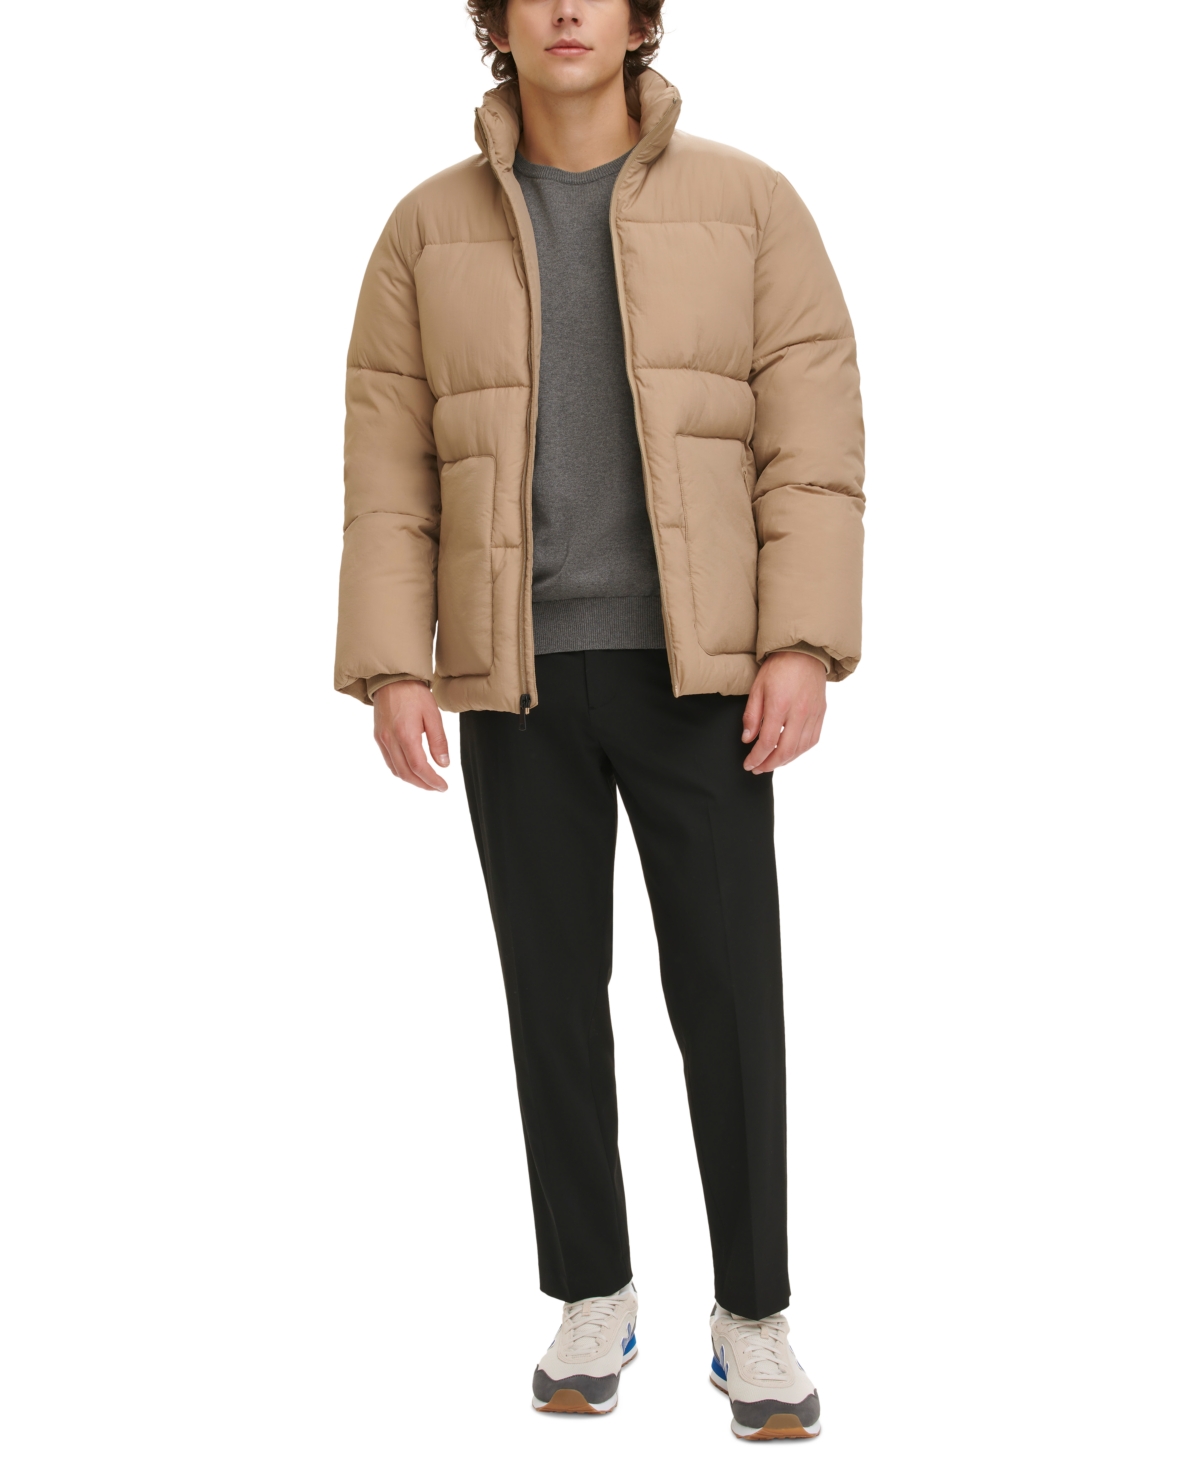 Dkny Men's Refined Quilted Full-zip Stand Collar Puffer Jacket In Khaki